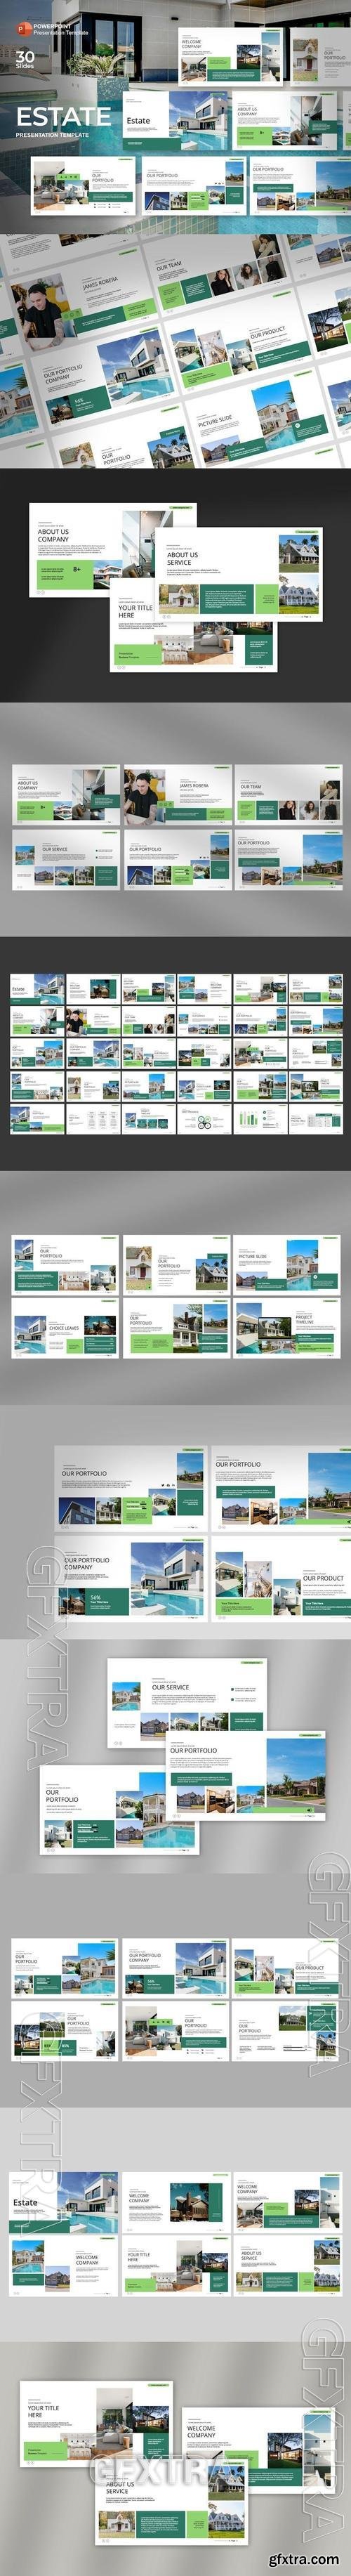 Real Estate Powerpoint Template 4CPXPQ6